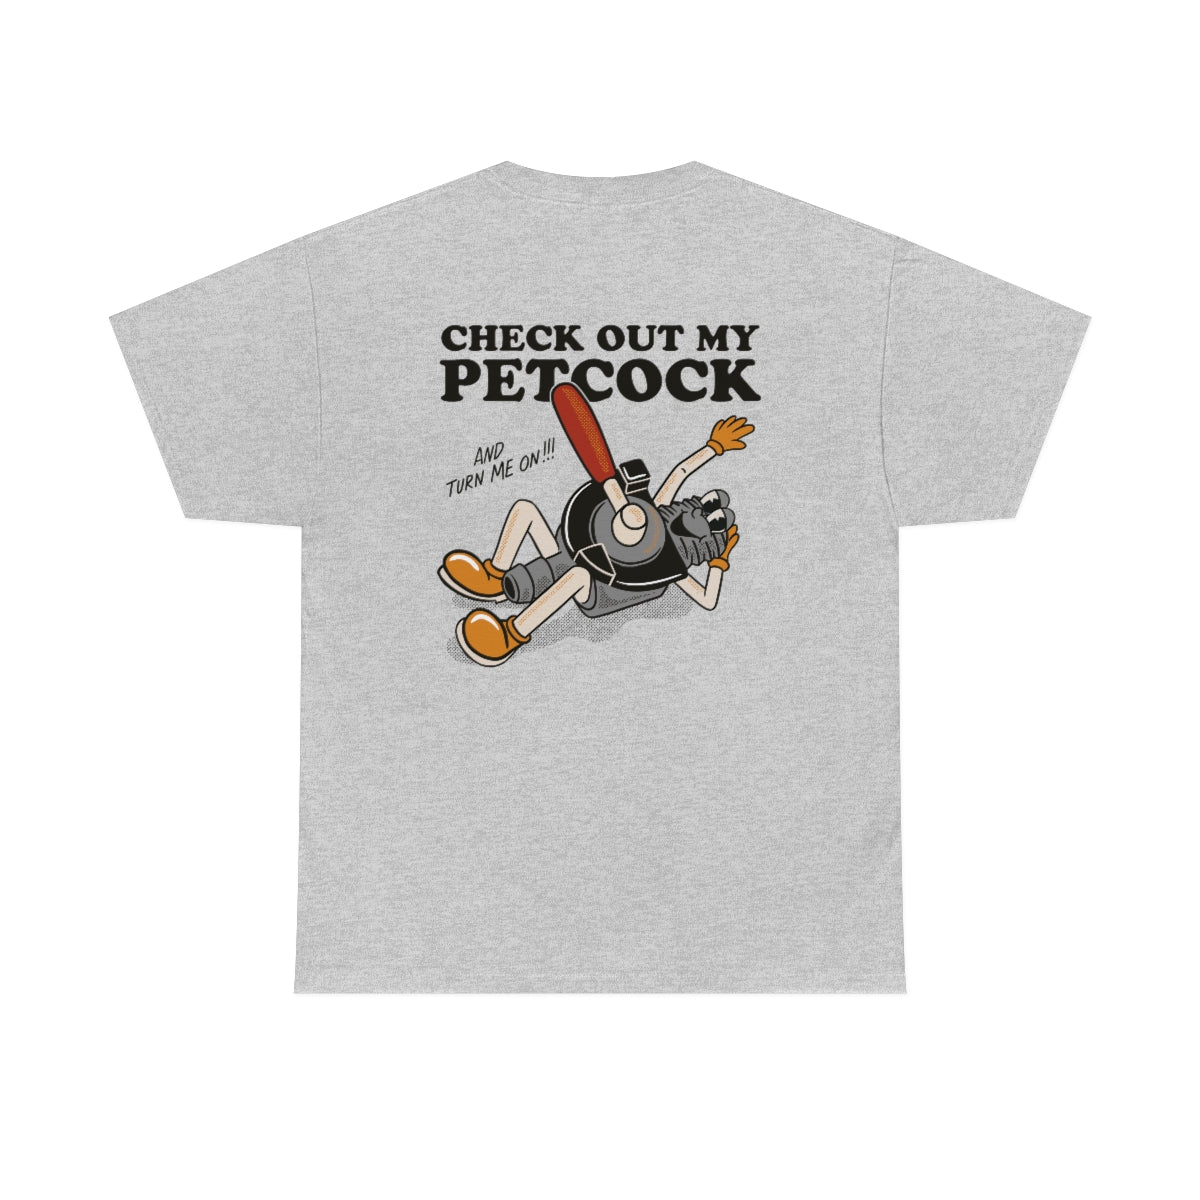 Check out my Petcock - Unisex Tee